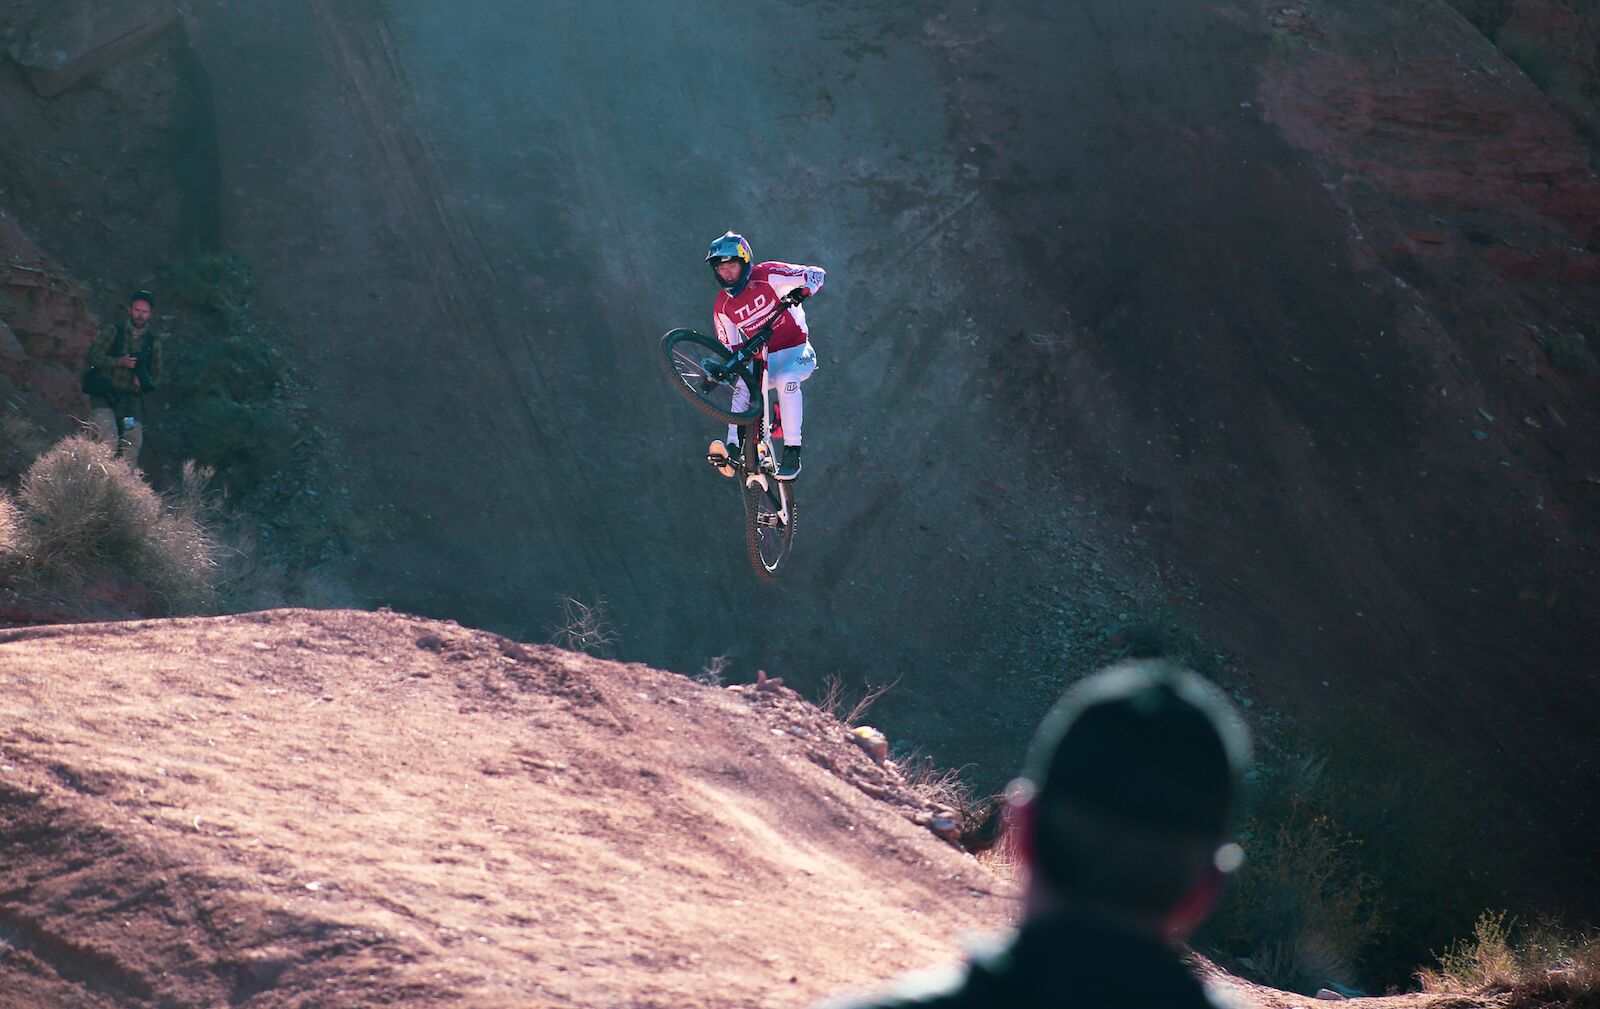 Women in action sports - red bull rampage 2021